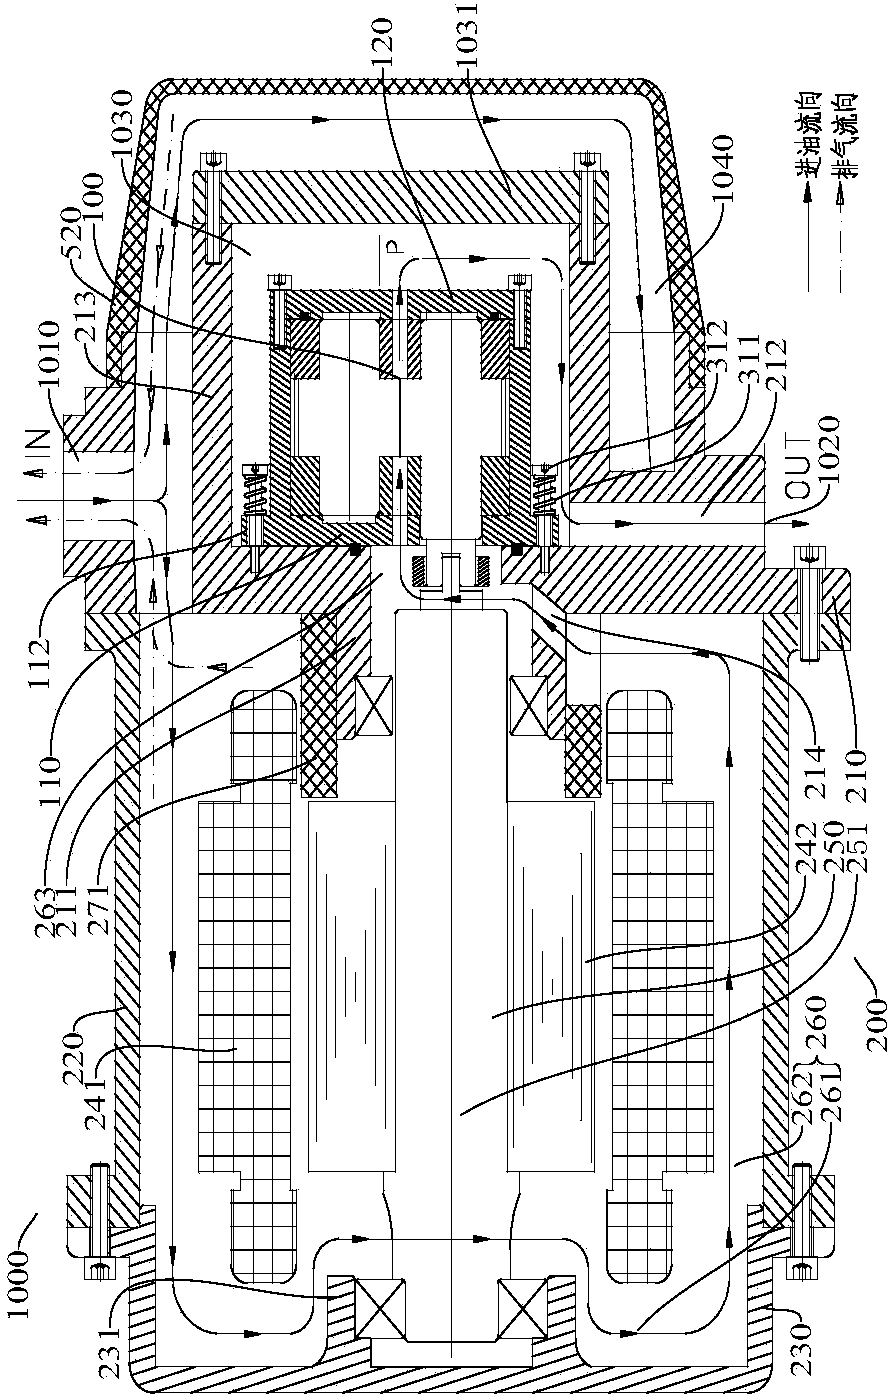 Electric oil pump assembly, steering system and lubricating system